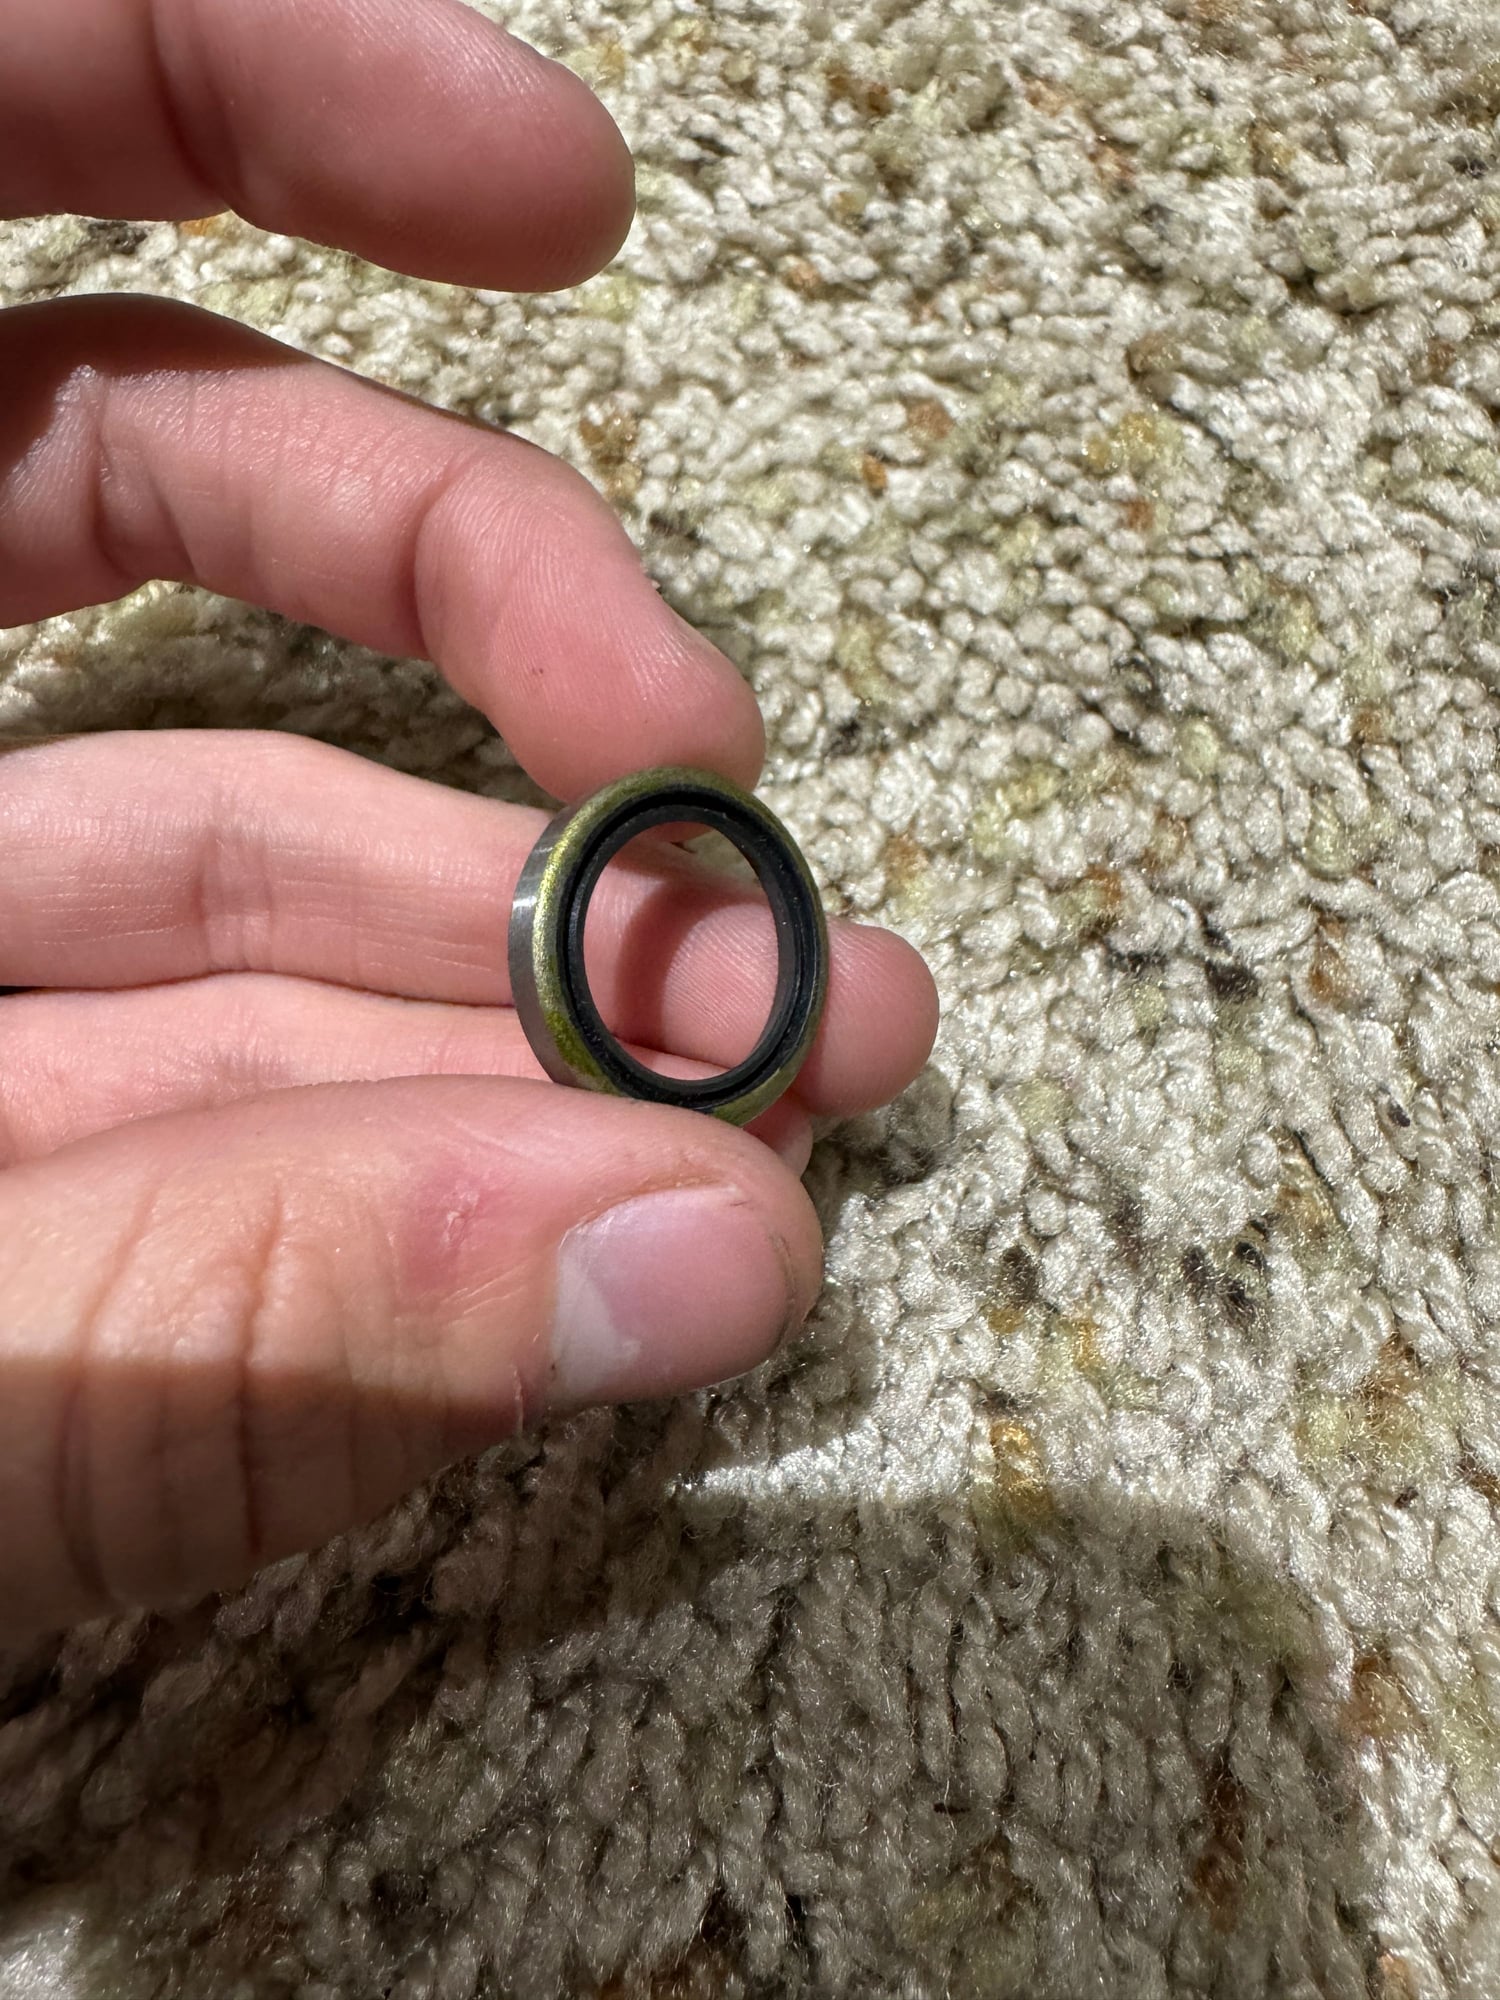 Engine - Internals - NOS Oil Seal? - New - 1960 to 2024 Mazda All Models - Watsonville, CA 95076, United States